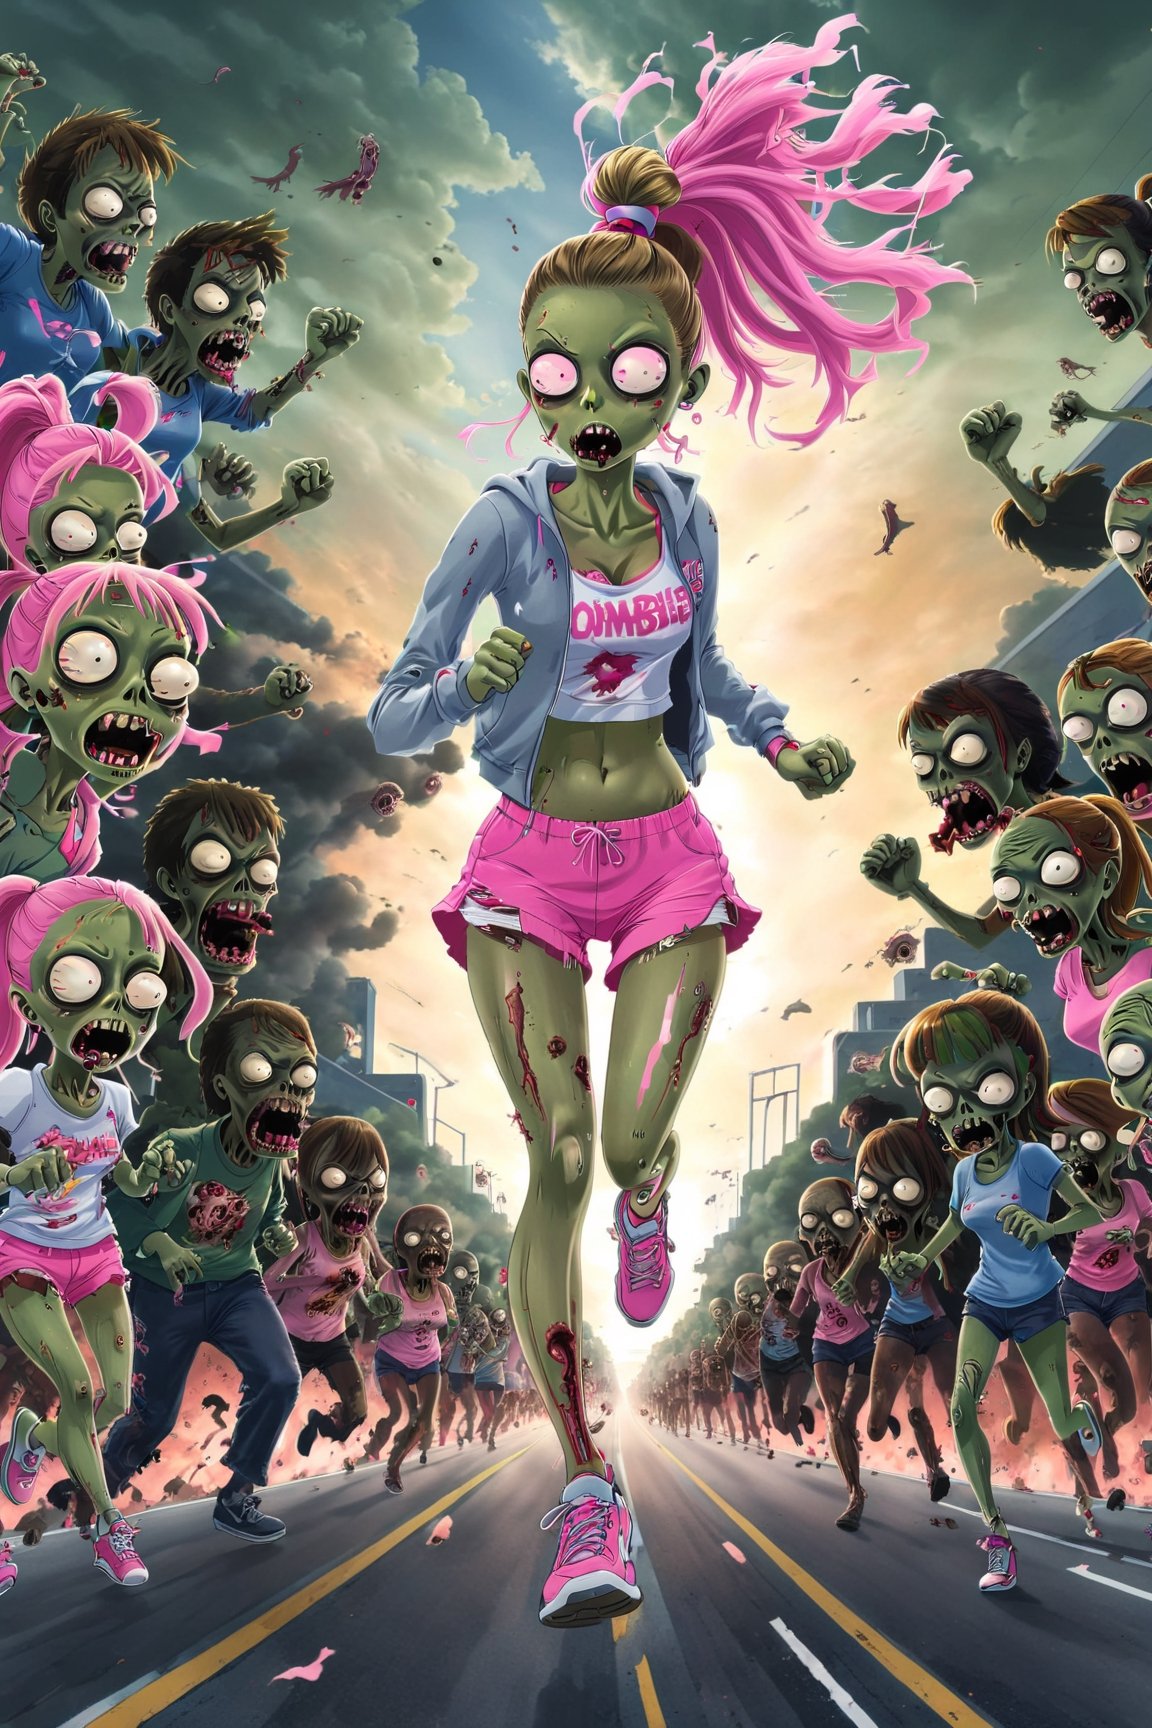   running girl, Gray Track Top, pink shorts, ponytail,(many zombies are following her,
outdoors, detailed highway background, Modern metropolis,